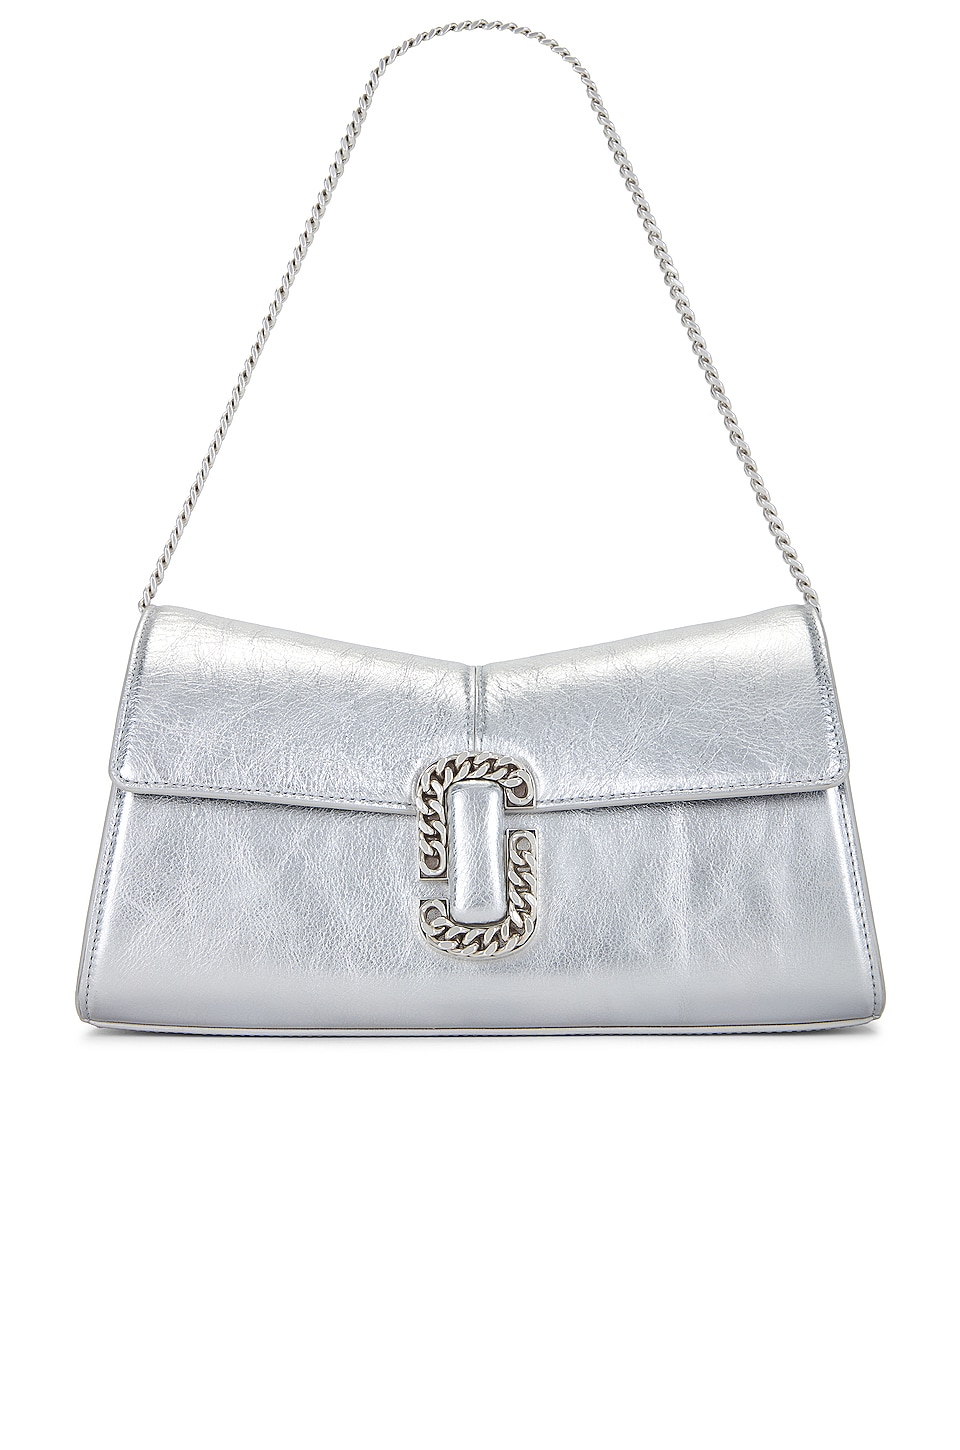 Image 1 of The Metallic St. Marc Clutch in Silver